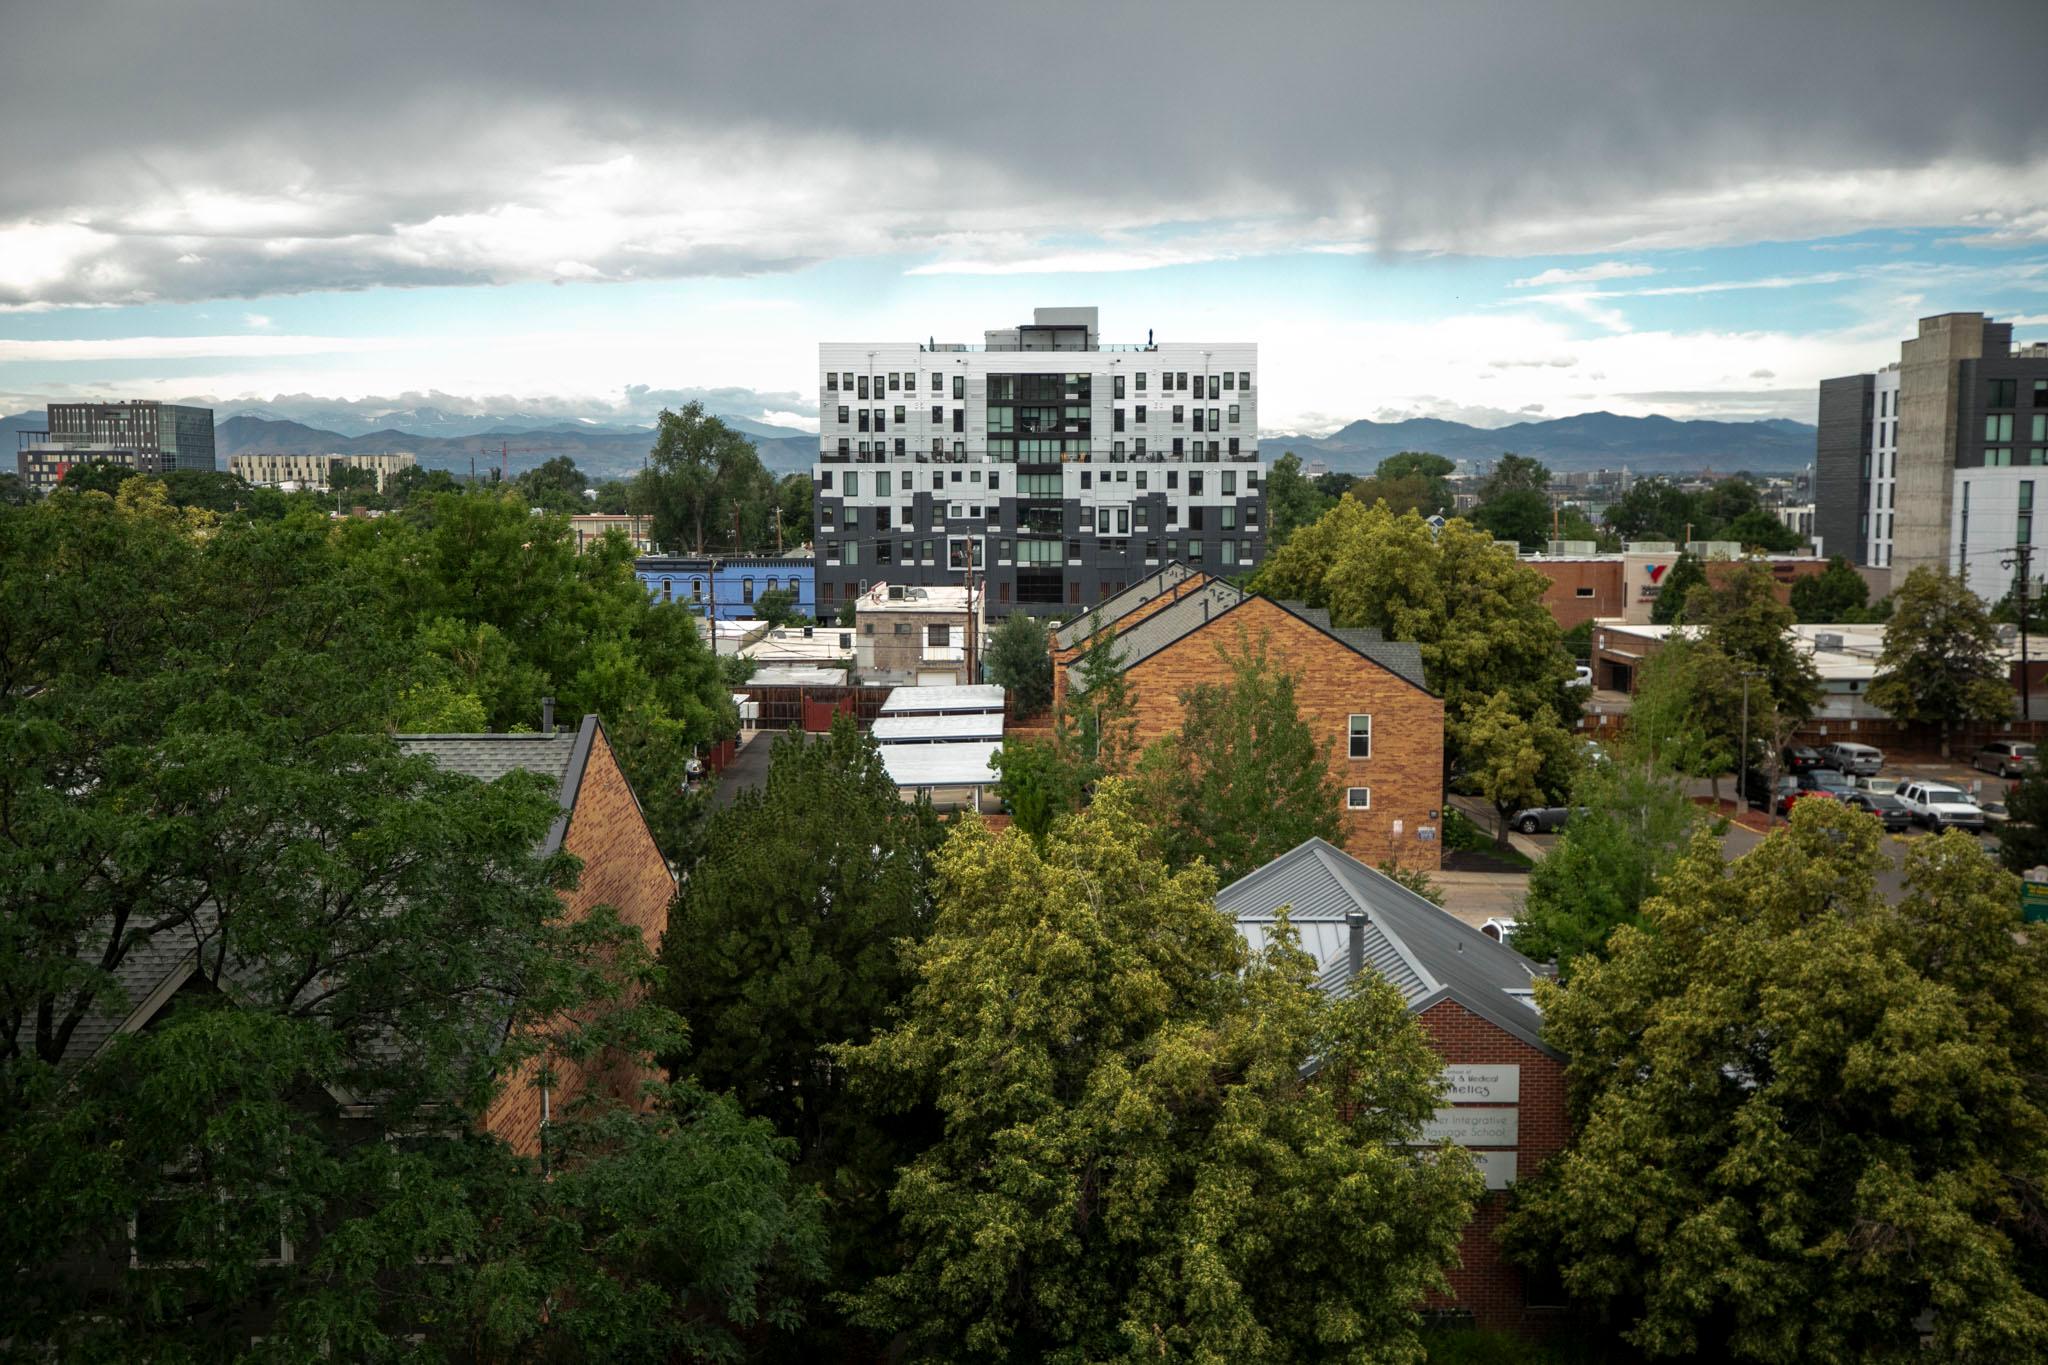 A grey and white building rises from a green neighborhood canopy, with cloudy skies above and the Rockies behind it.